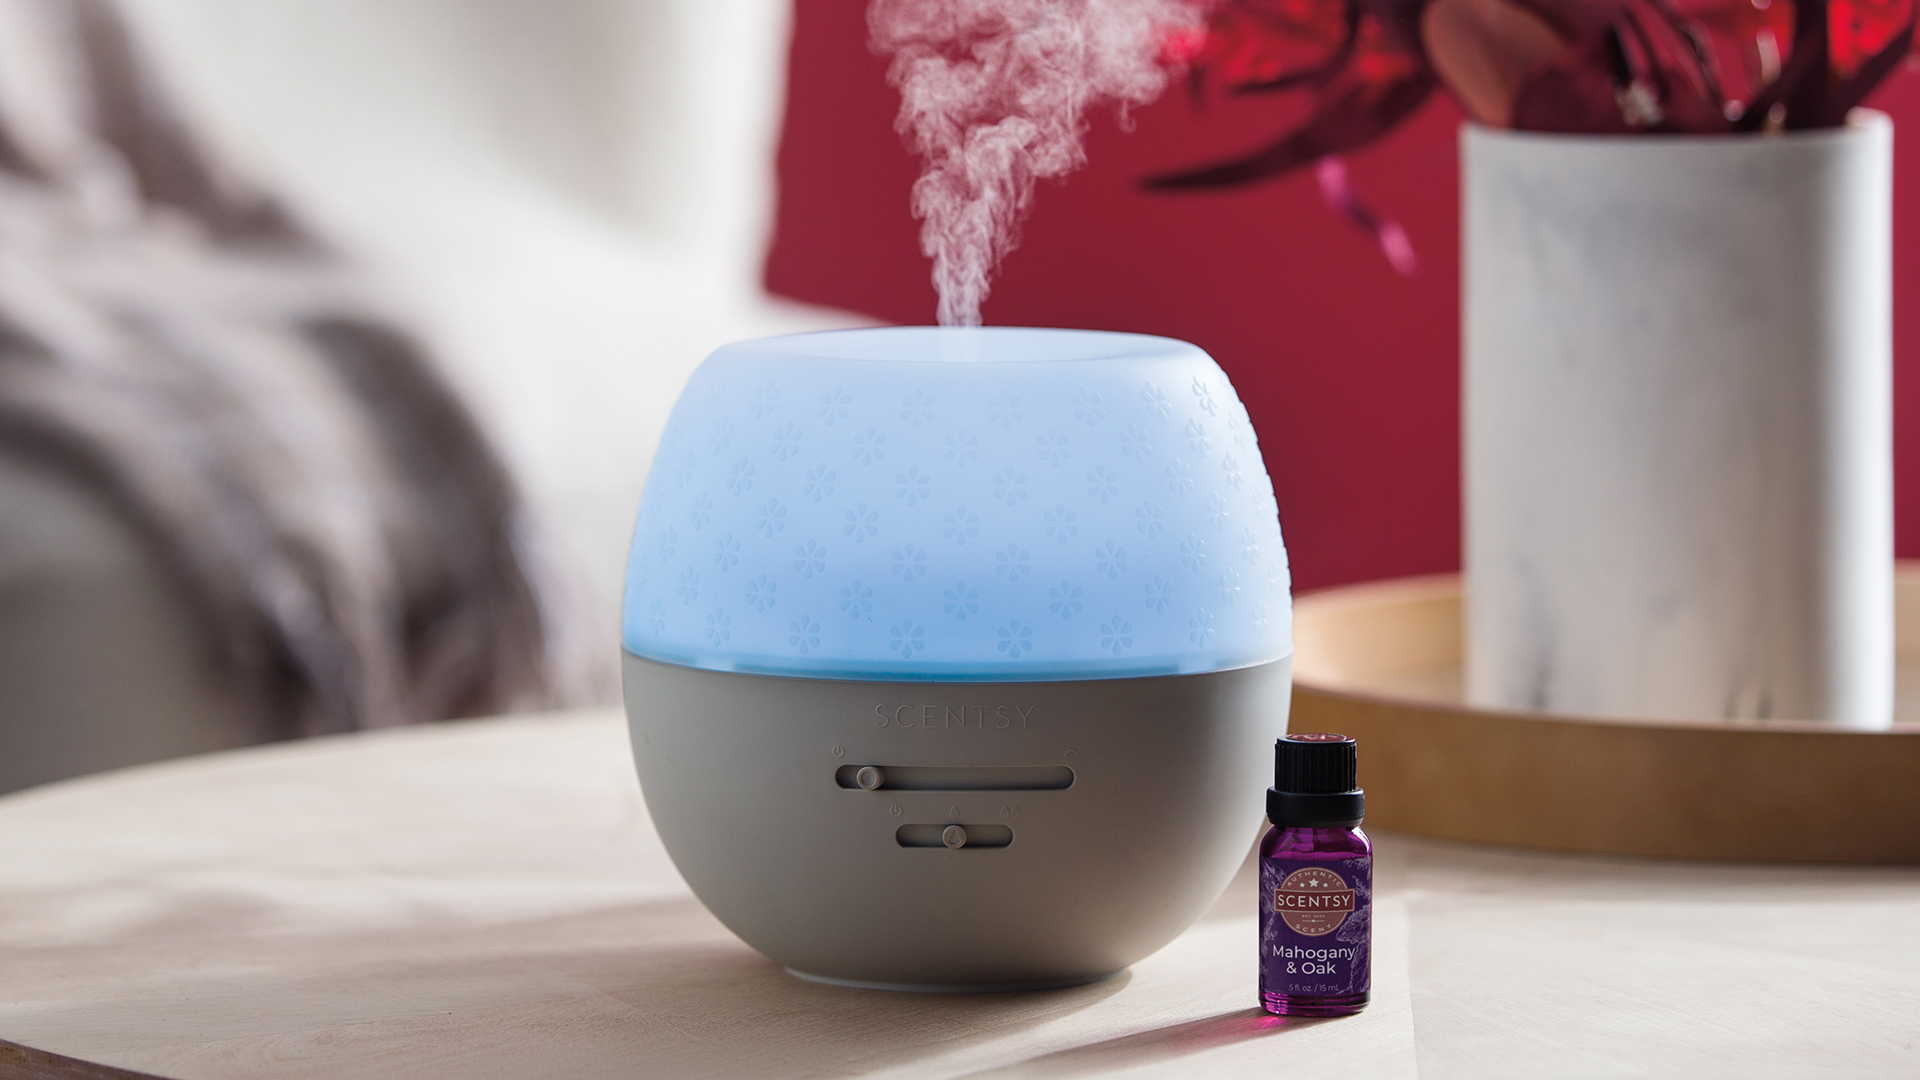 Top tips to get the most from your Scentsy products